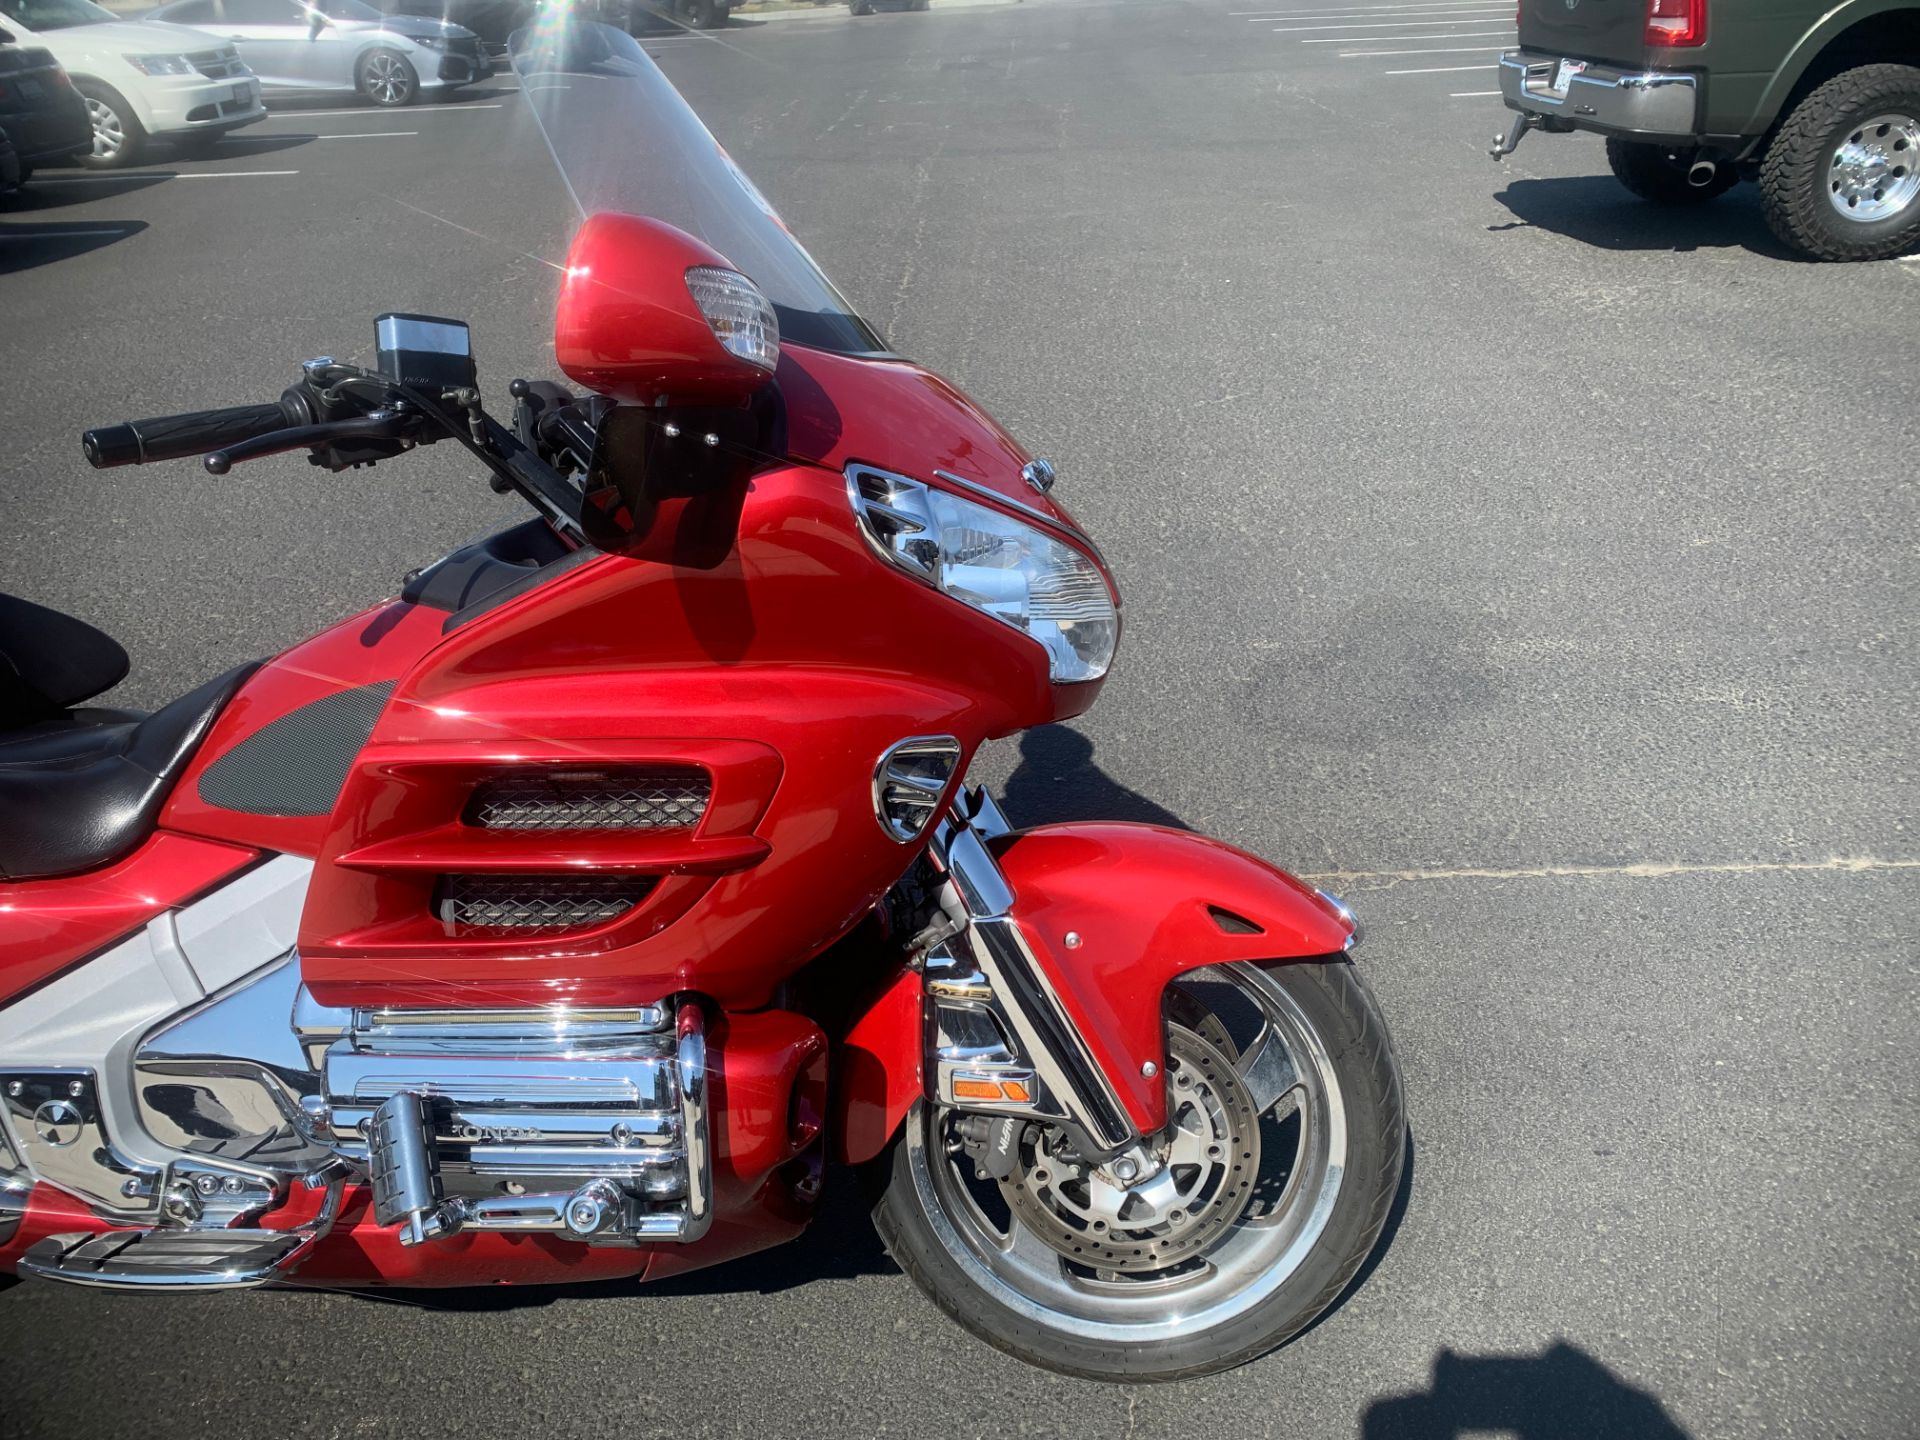 2004 Honda Gold Wing ABS in Hollister, California - Photo 6